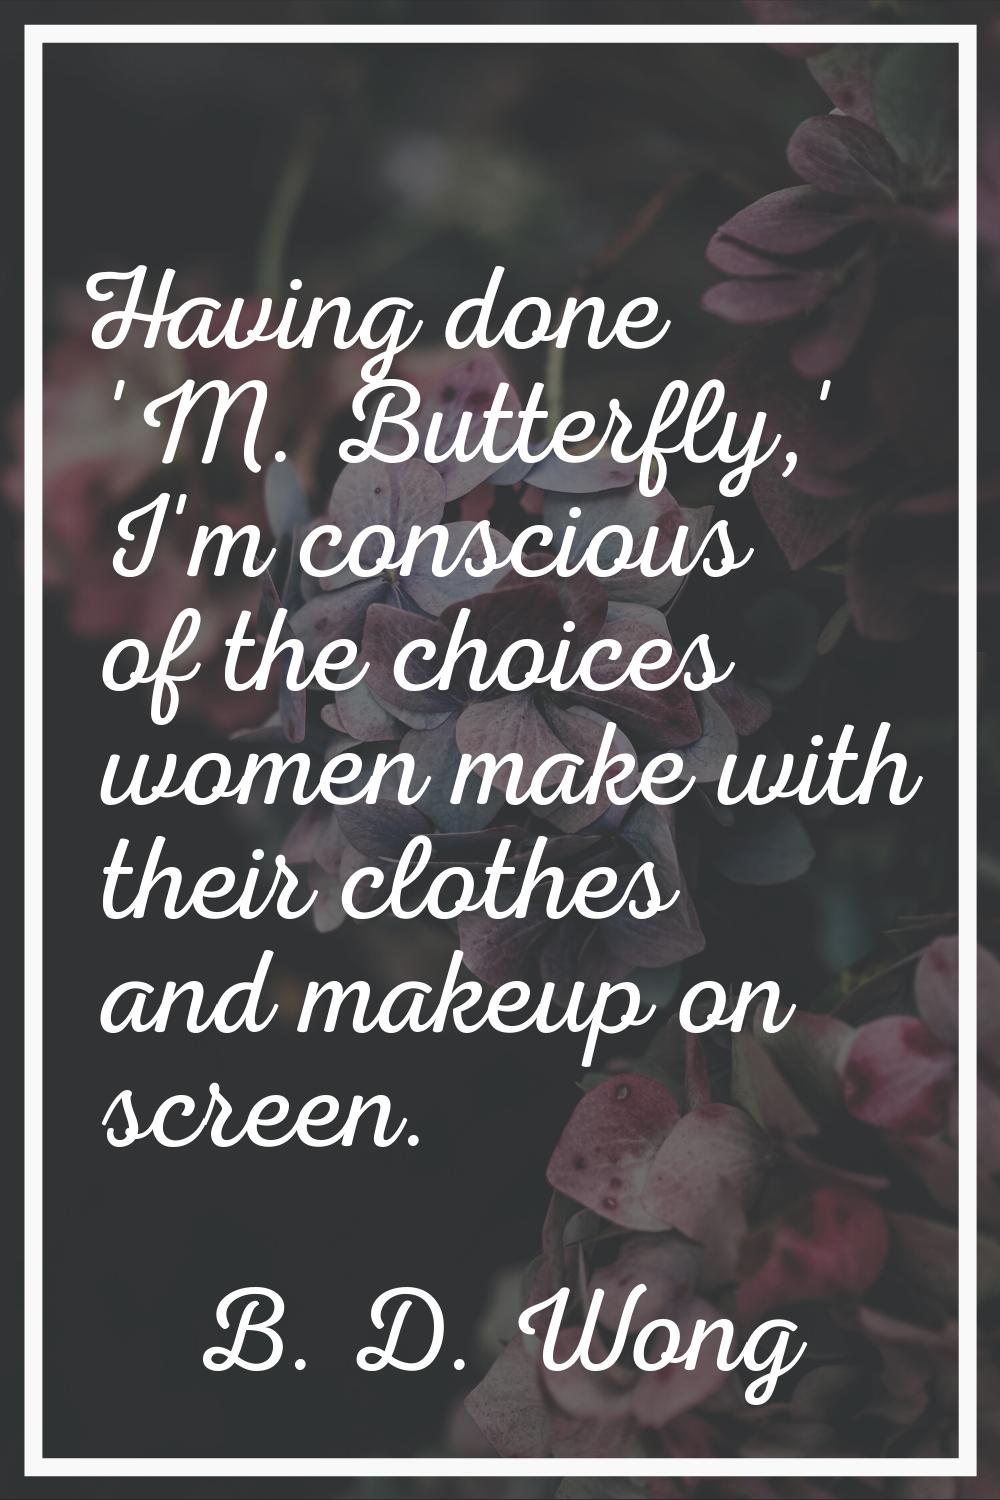 Having done 'M. Butterfly,' I'm conscious of the choices women make with their clothes and makeup o